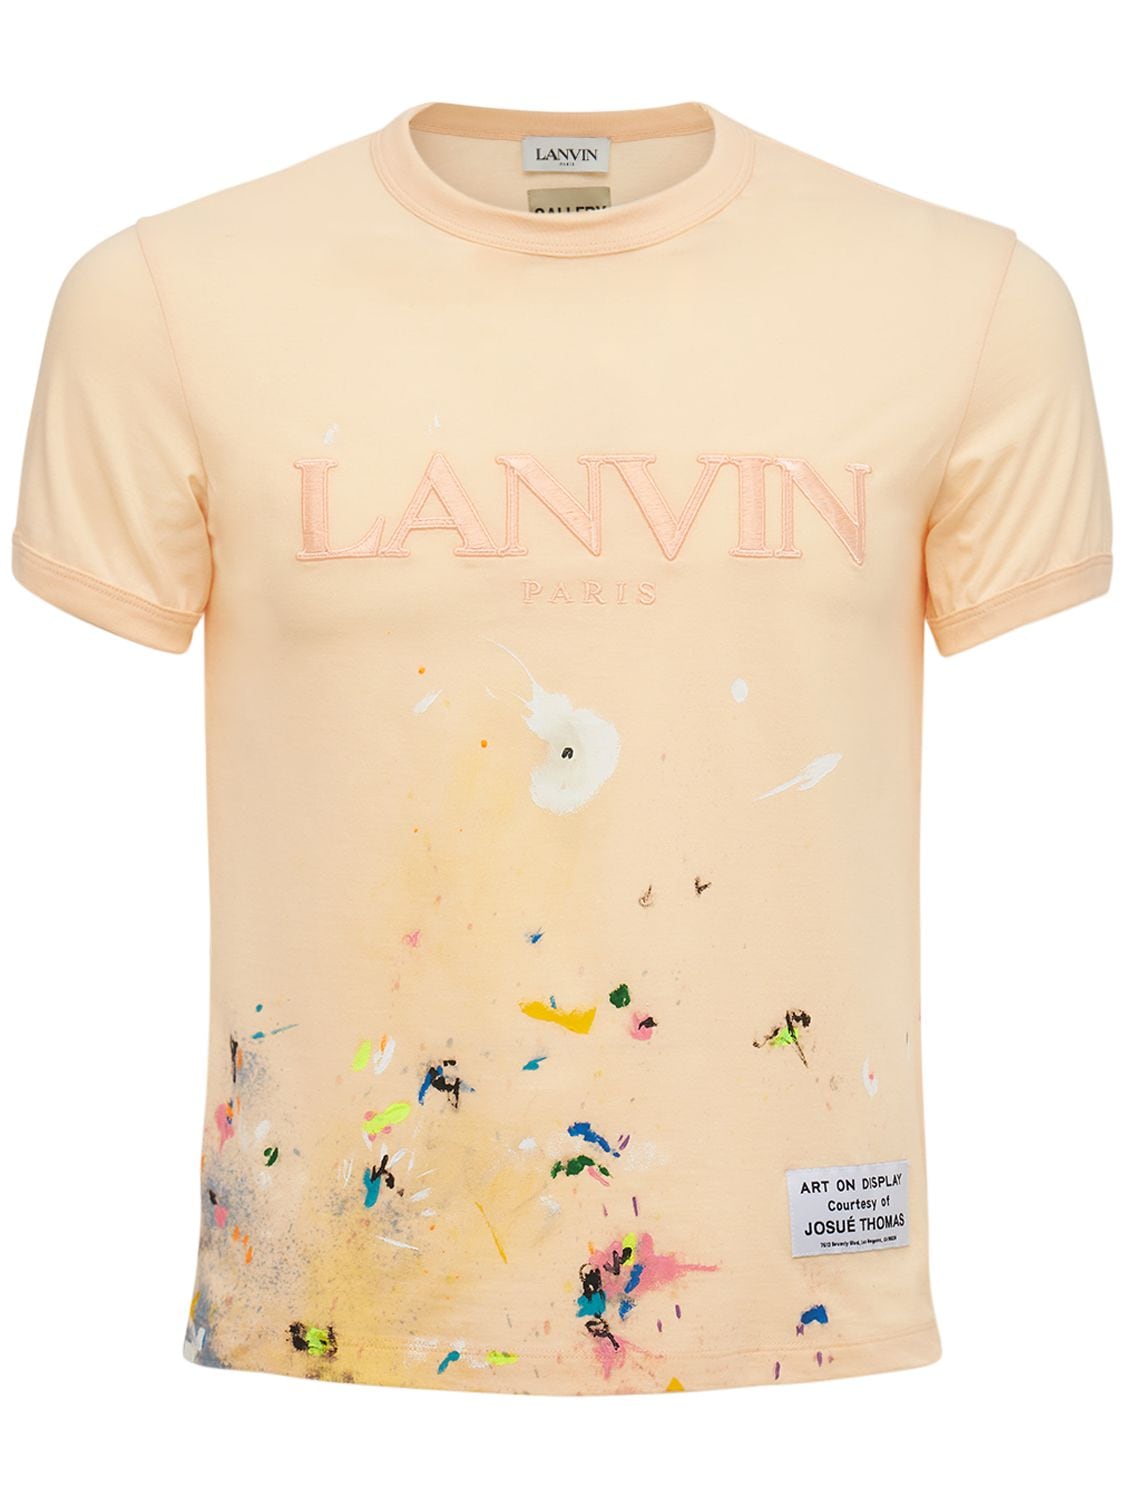 Gallery Dept. X Lanvin Relaxed Hand Painted Washed T-shirt In Pink,multi